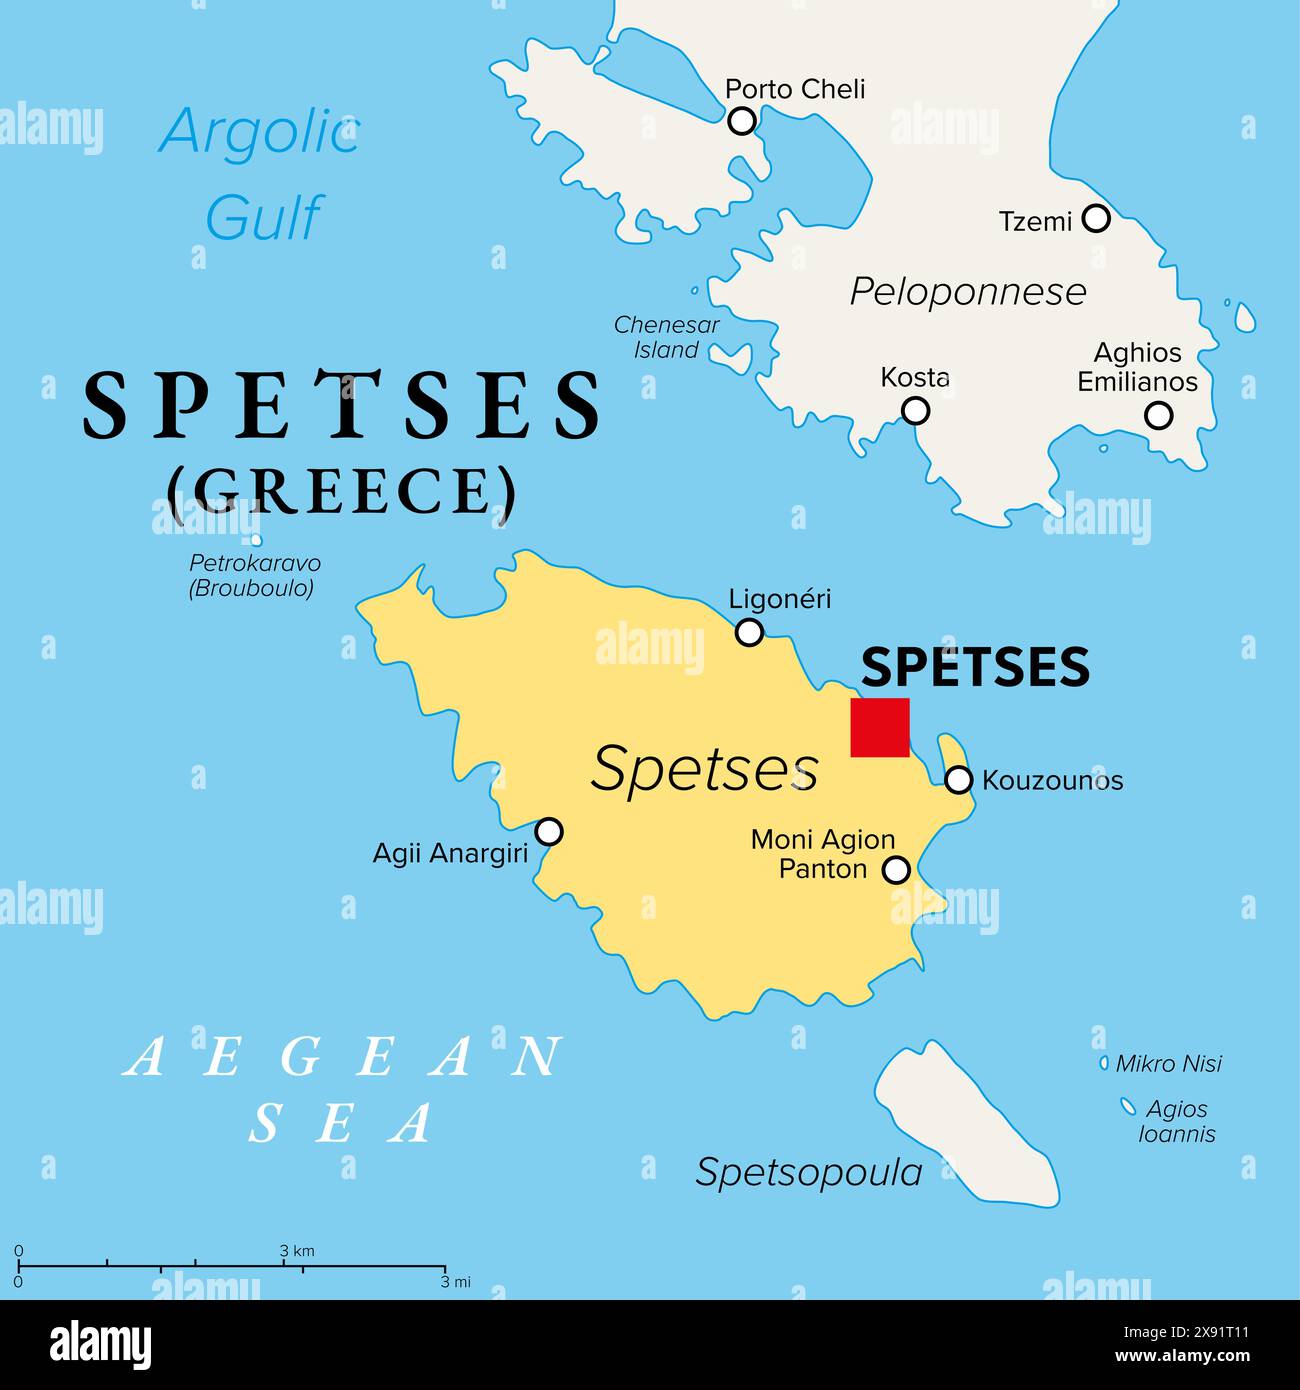 Spetses, Greek island, political map. Small island and municipality in the Aegean Sea, and part of the Saronic Islands, with the main town Spetses. Stock Photo